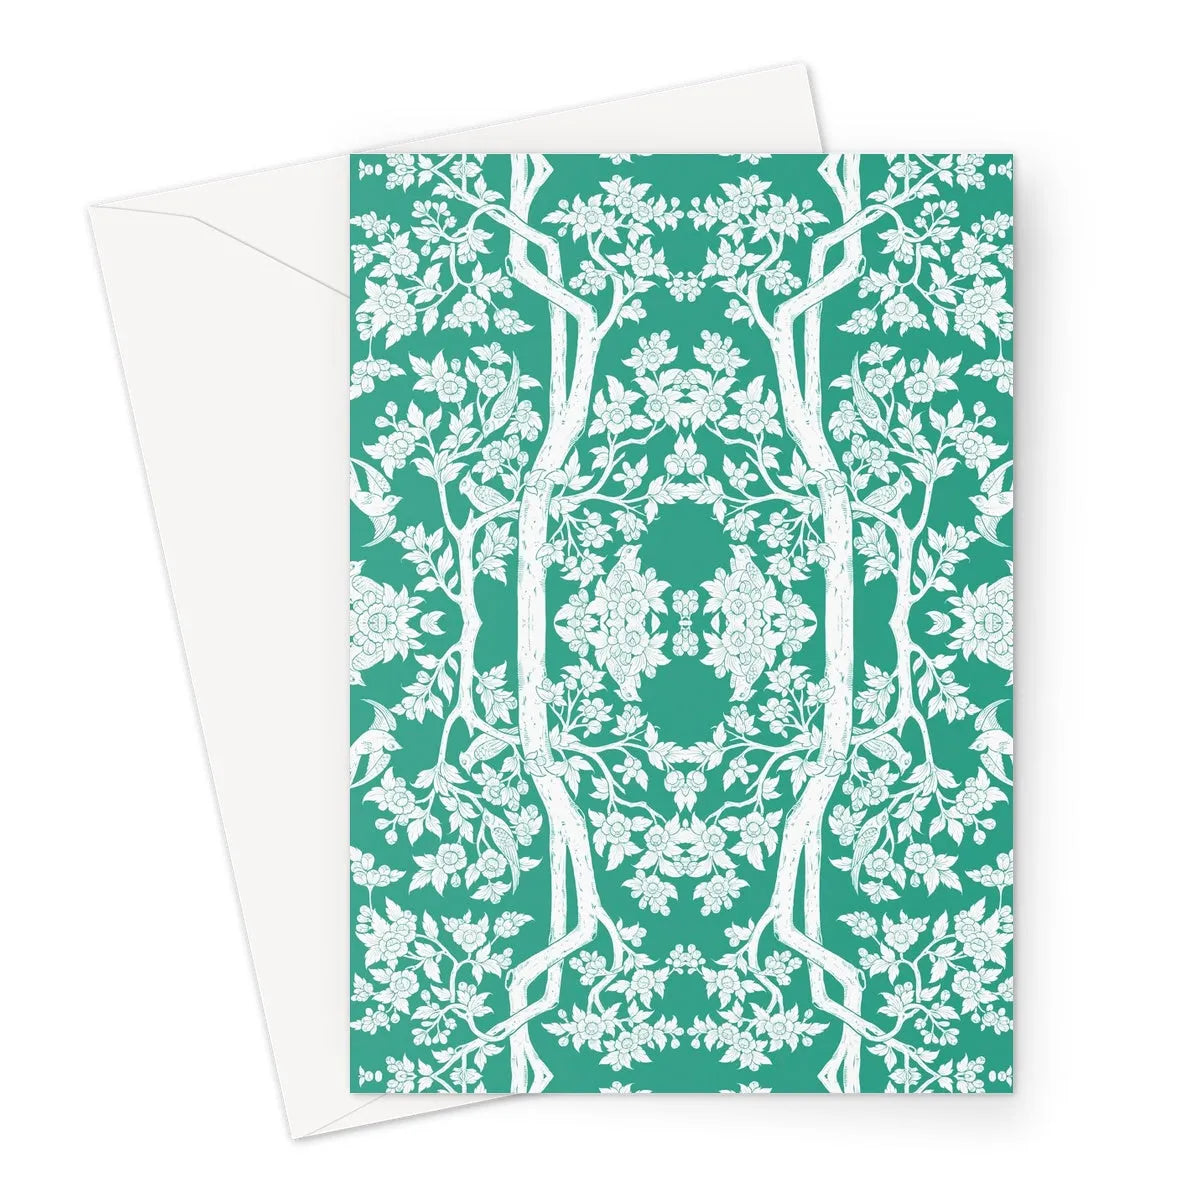 Aviary Green Greeting Card - A5 Portrait / 1 Card - Greeting & Note Cards - Aesthetic Art